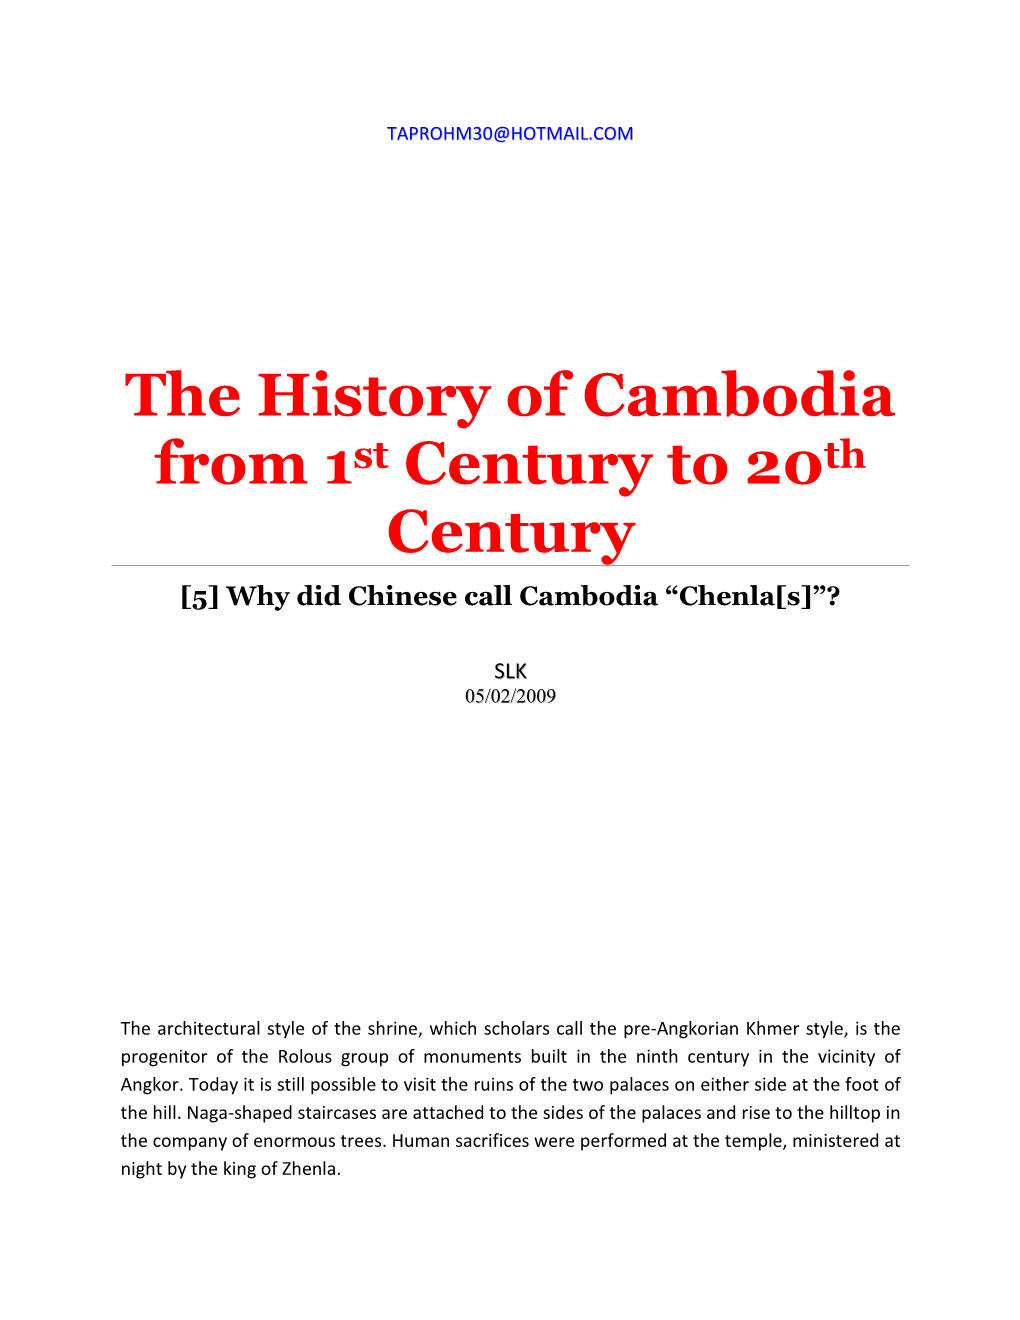 Why Did Chinese Call Cambodia Chenla